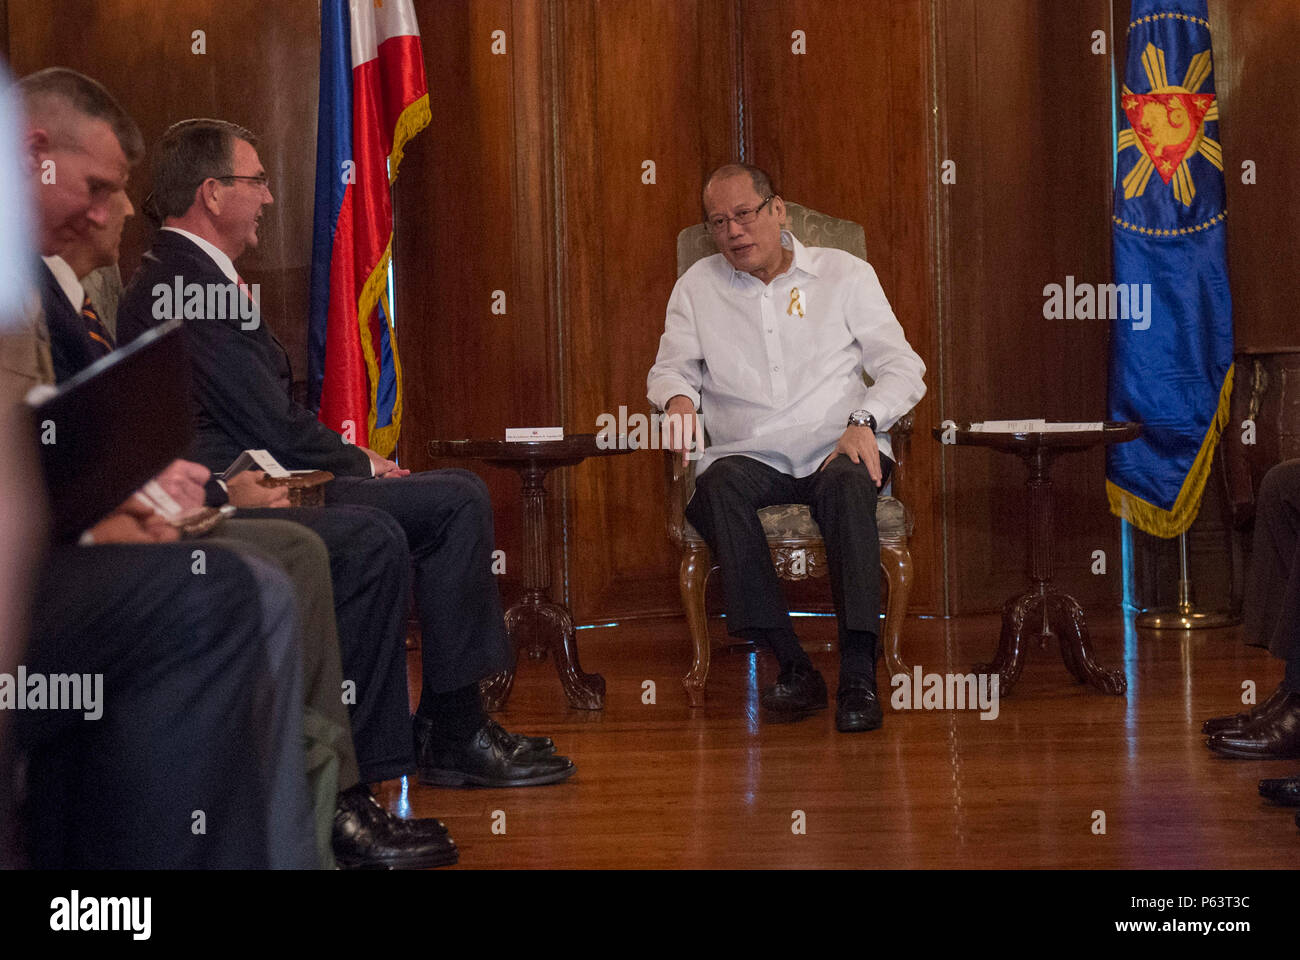 Secretary of Defense Ash Carter meets with Philippine President Benigno S. Aquino III as they meet to discuss matters of mutual importance at the Malacanang Palace in Manila, Philippines April 14, 2016. Carter is visiting the Philippines to solidify the rebalance to the Asia-Pacific region.(Photo by Senior Master Sgt. Adrian Cadiz)(Released) Stock Photo